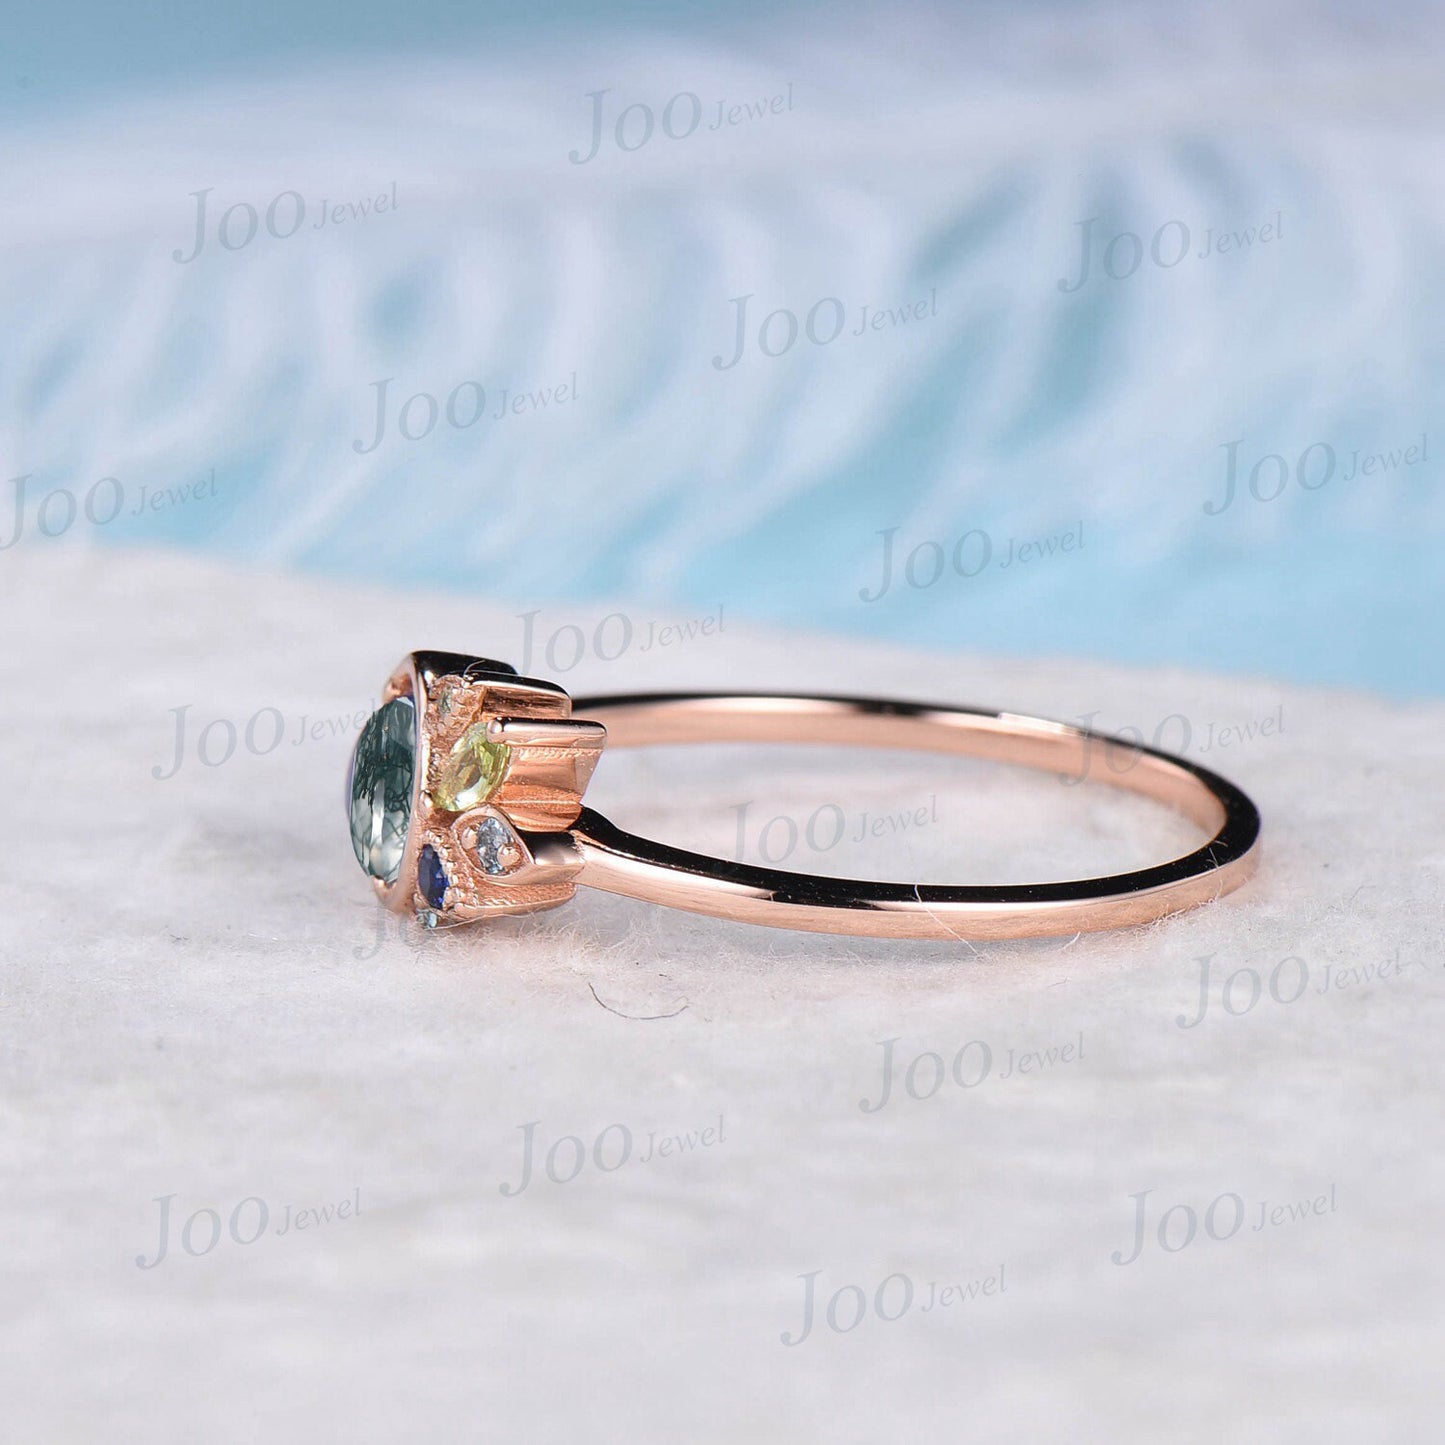 Unique 5mm Round Green Moss Agate Cluster Wedding Ring Celestial Engagement Rings Custom Multi-Birthstone Personalized Handmade Family Ring